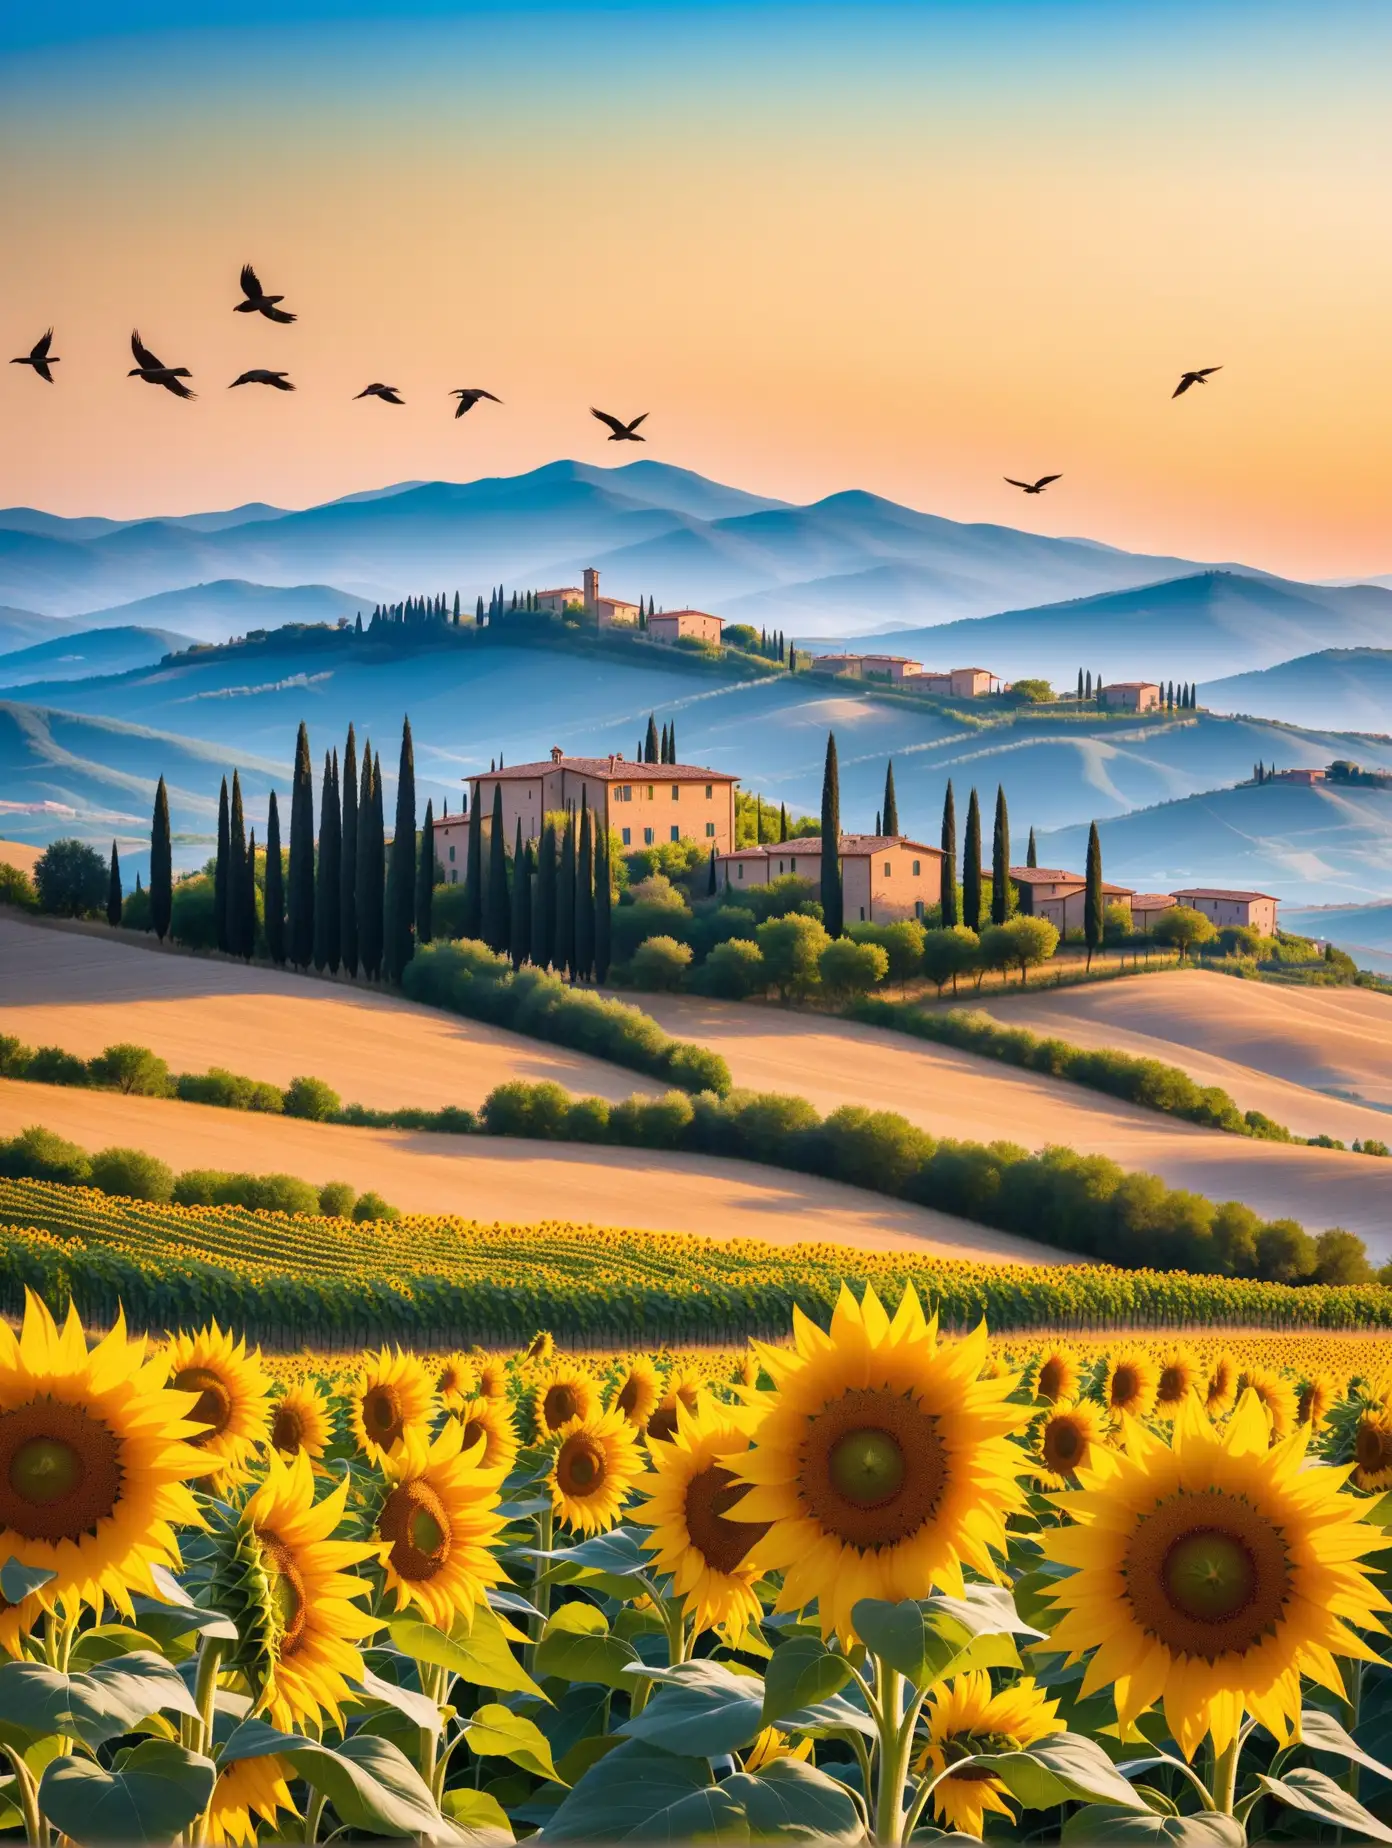 Mountains of Tuscany with sunflowers in the foreground and birds in the sky